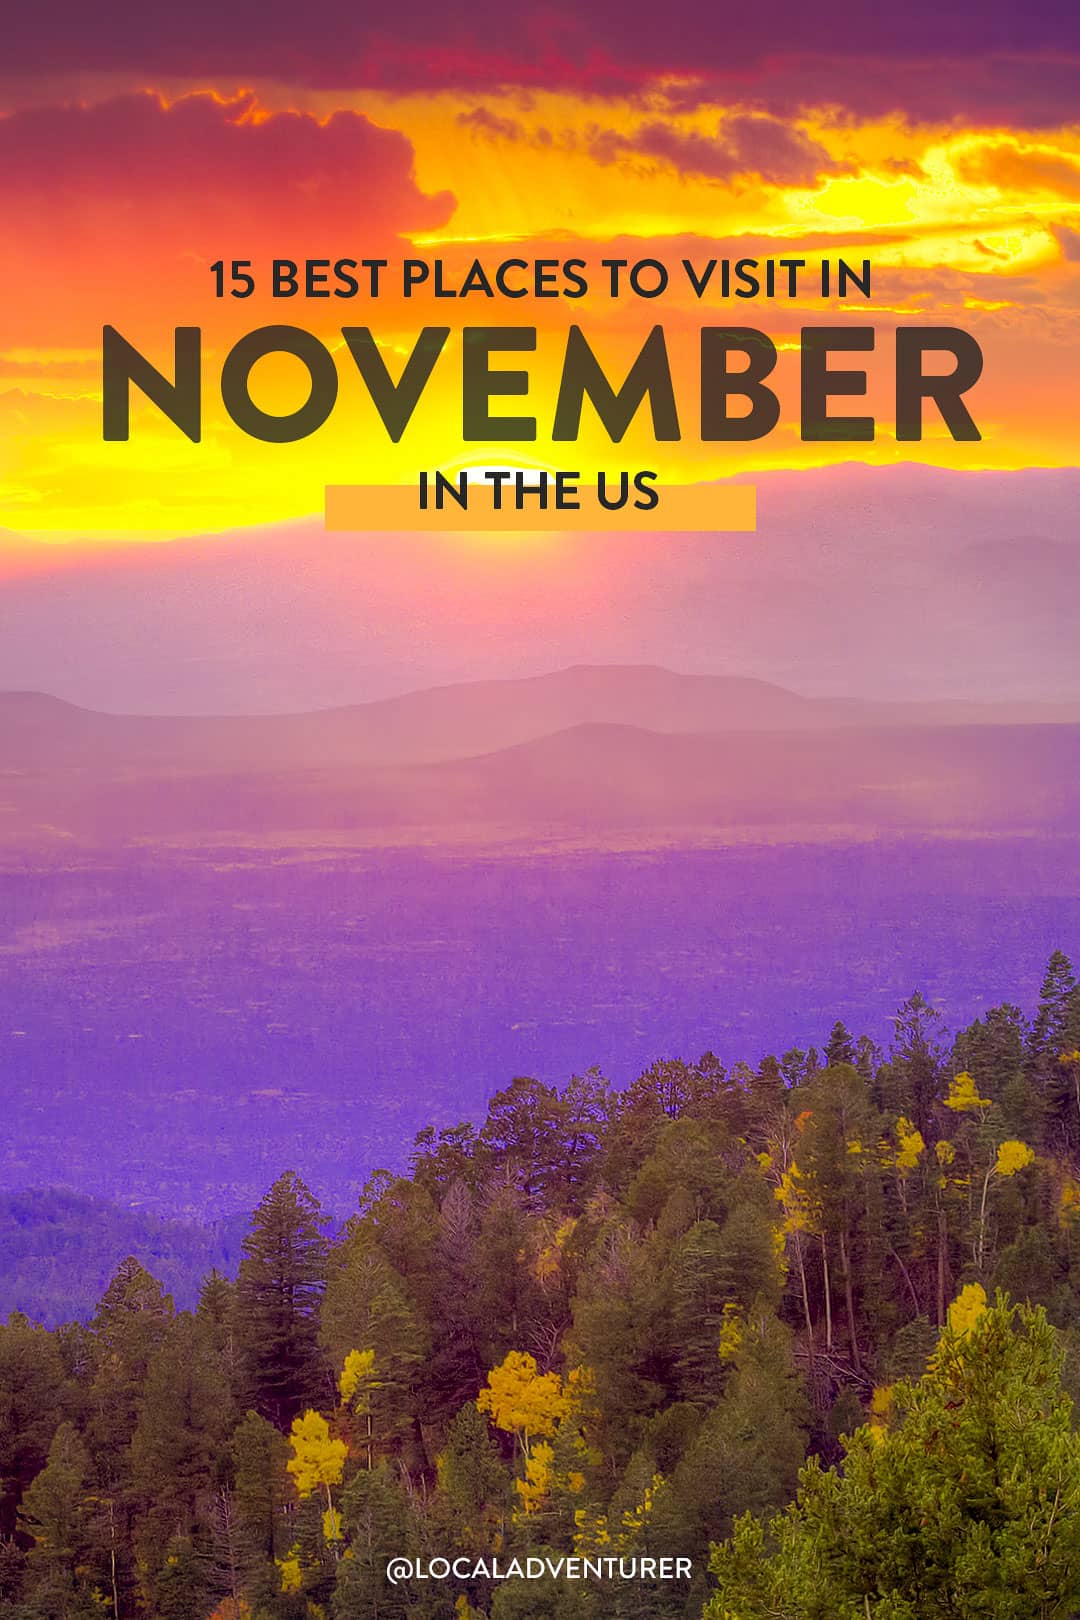 15 Best Places to Visit in November in USA